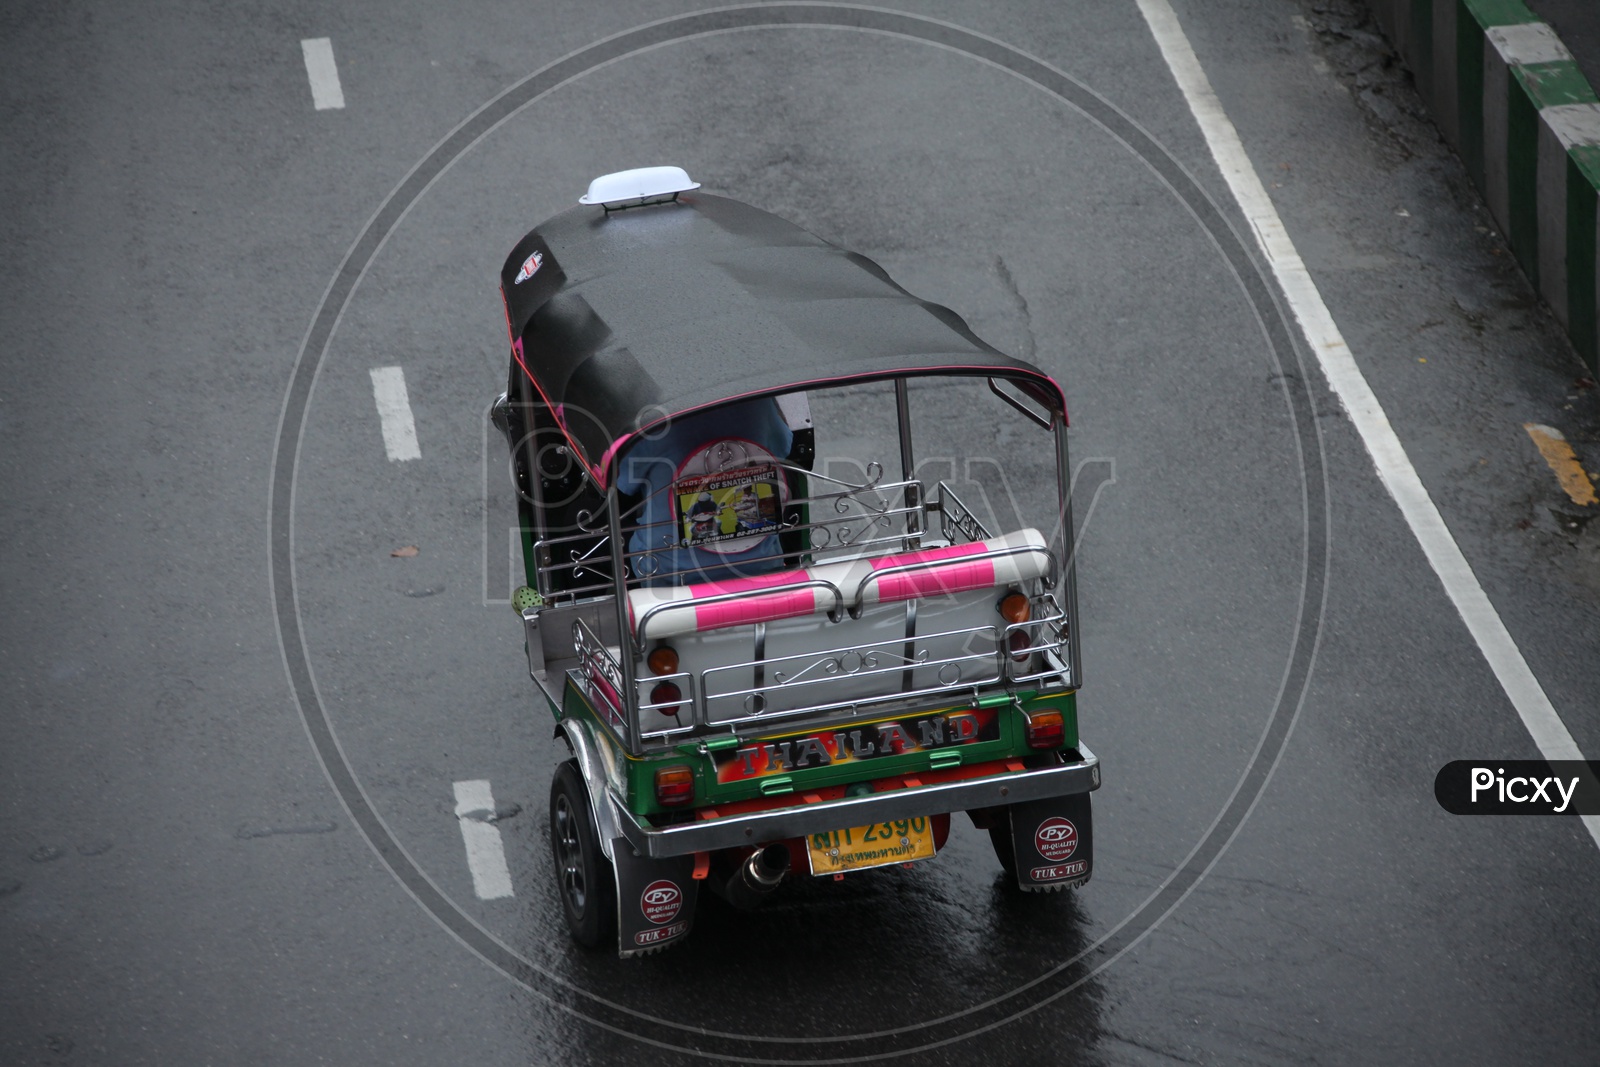 A rickshaw moving on a wet road